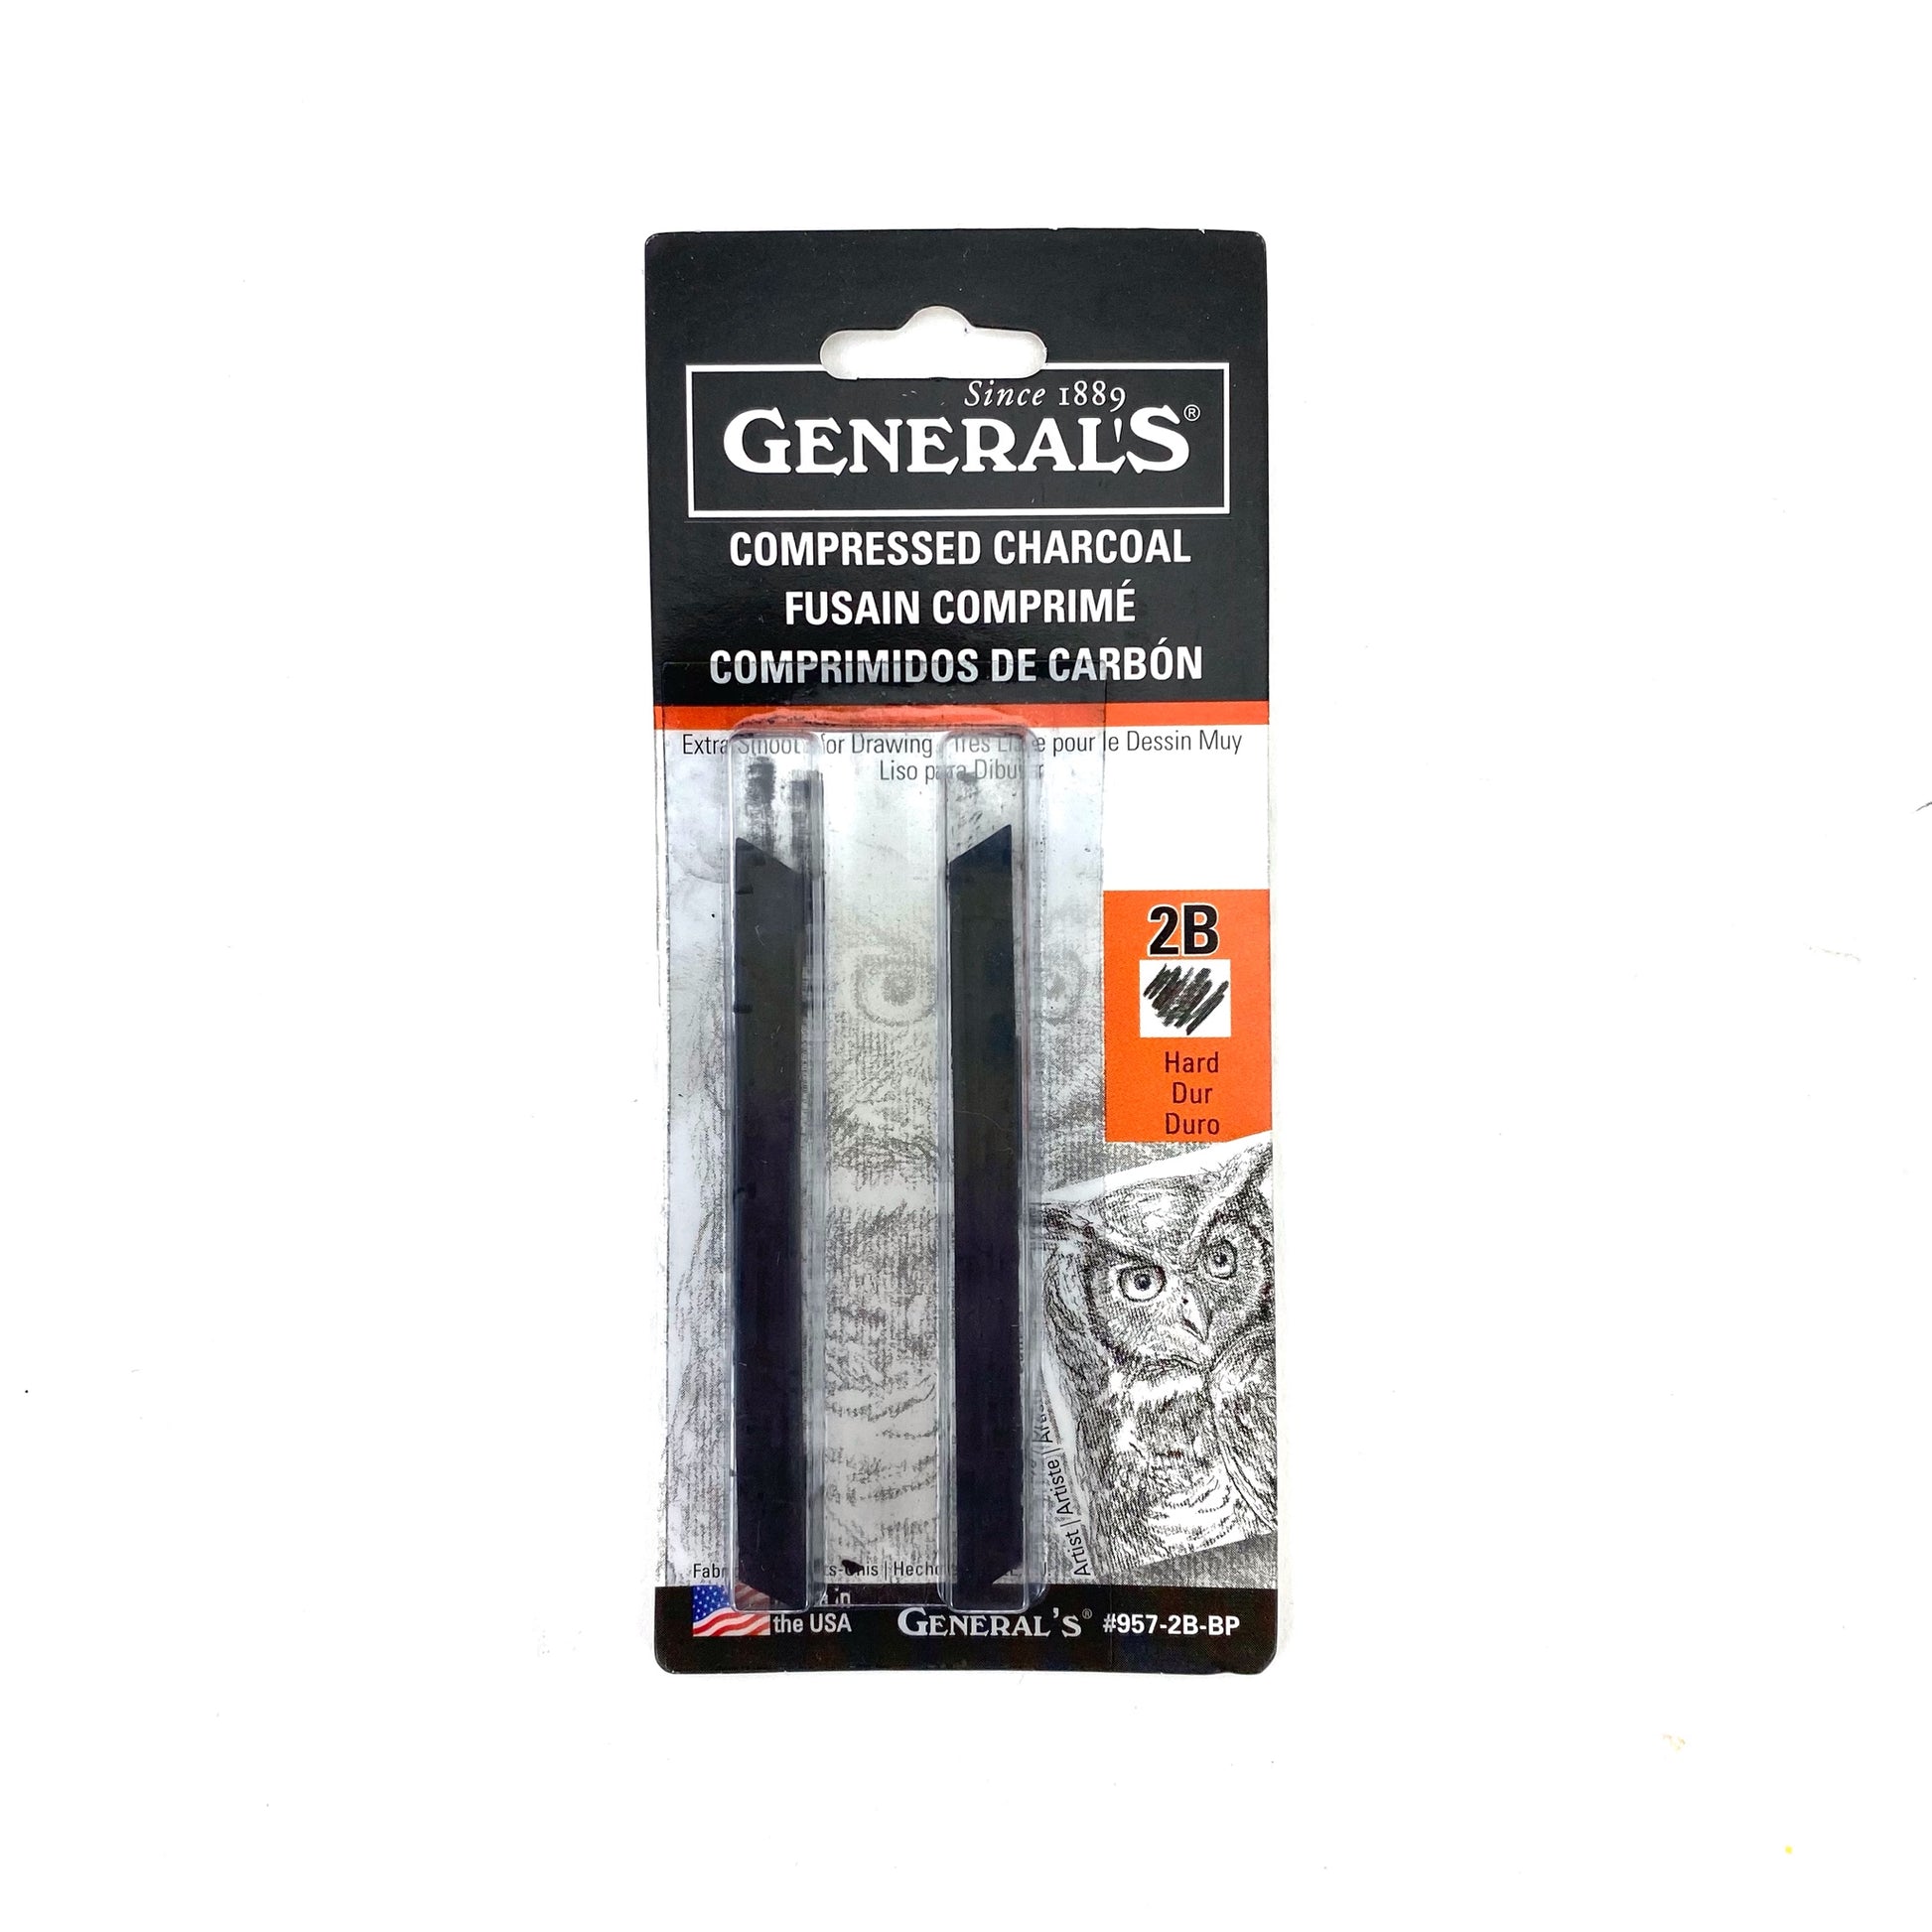 Compressed Charcoal Stick 4 pack - Assorted